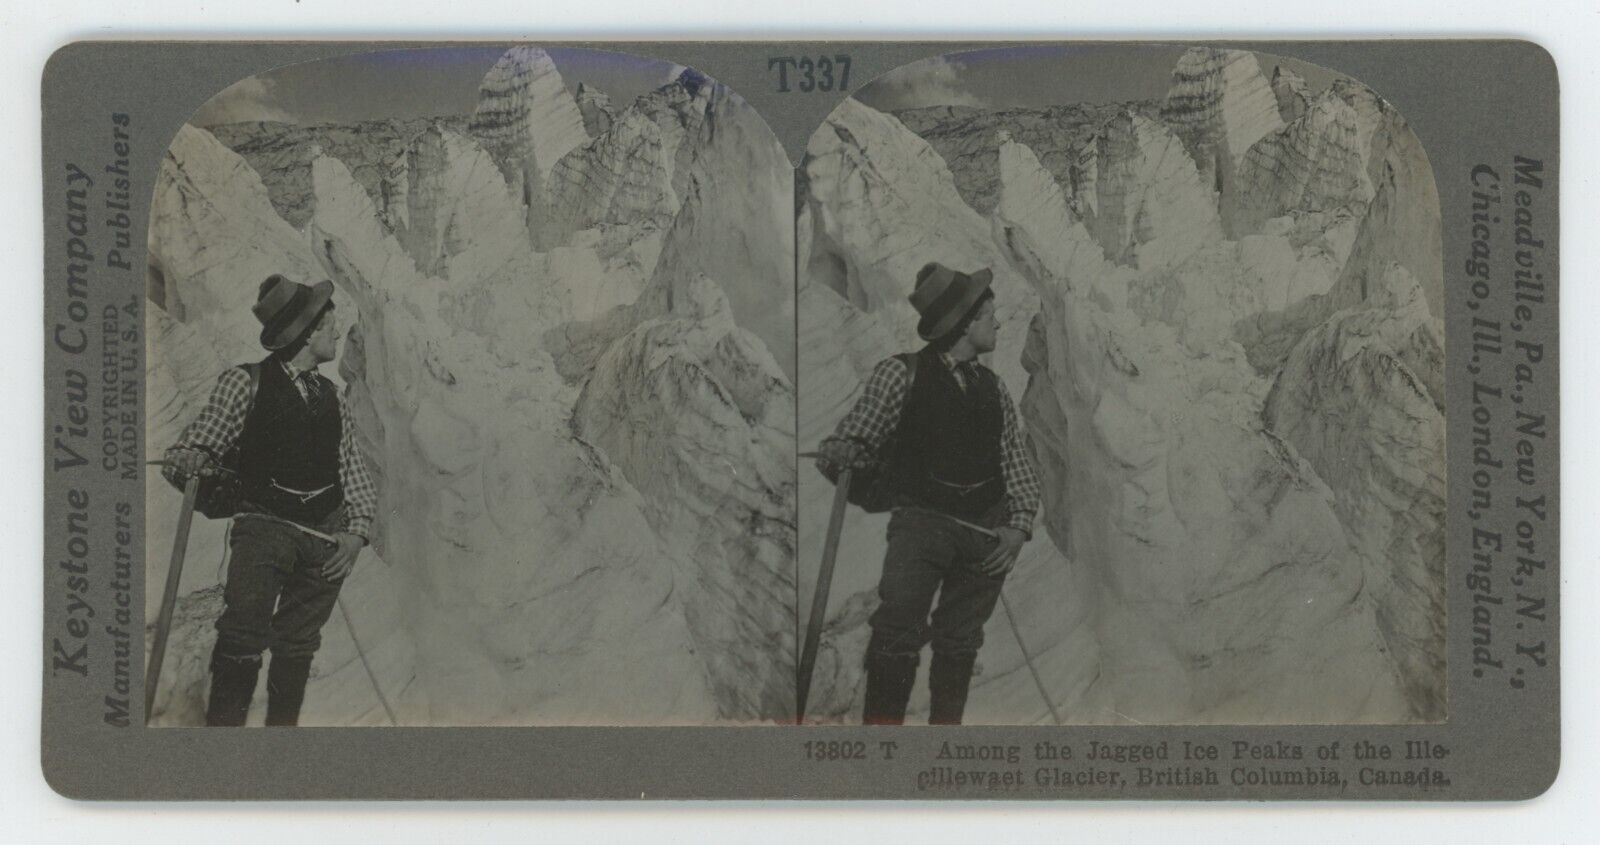 c1900's Stereoview Among the Jagged Ice Peaks of the Illecillewaet Glacier BC CA